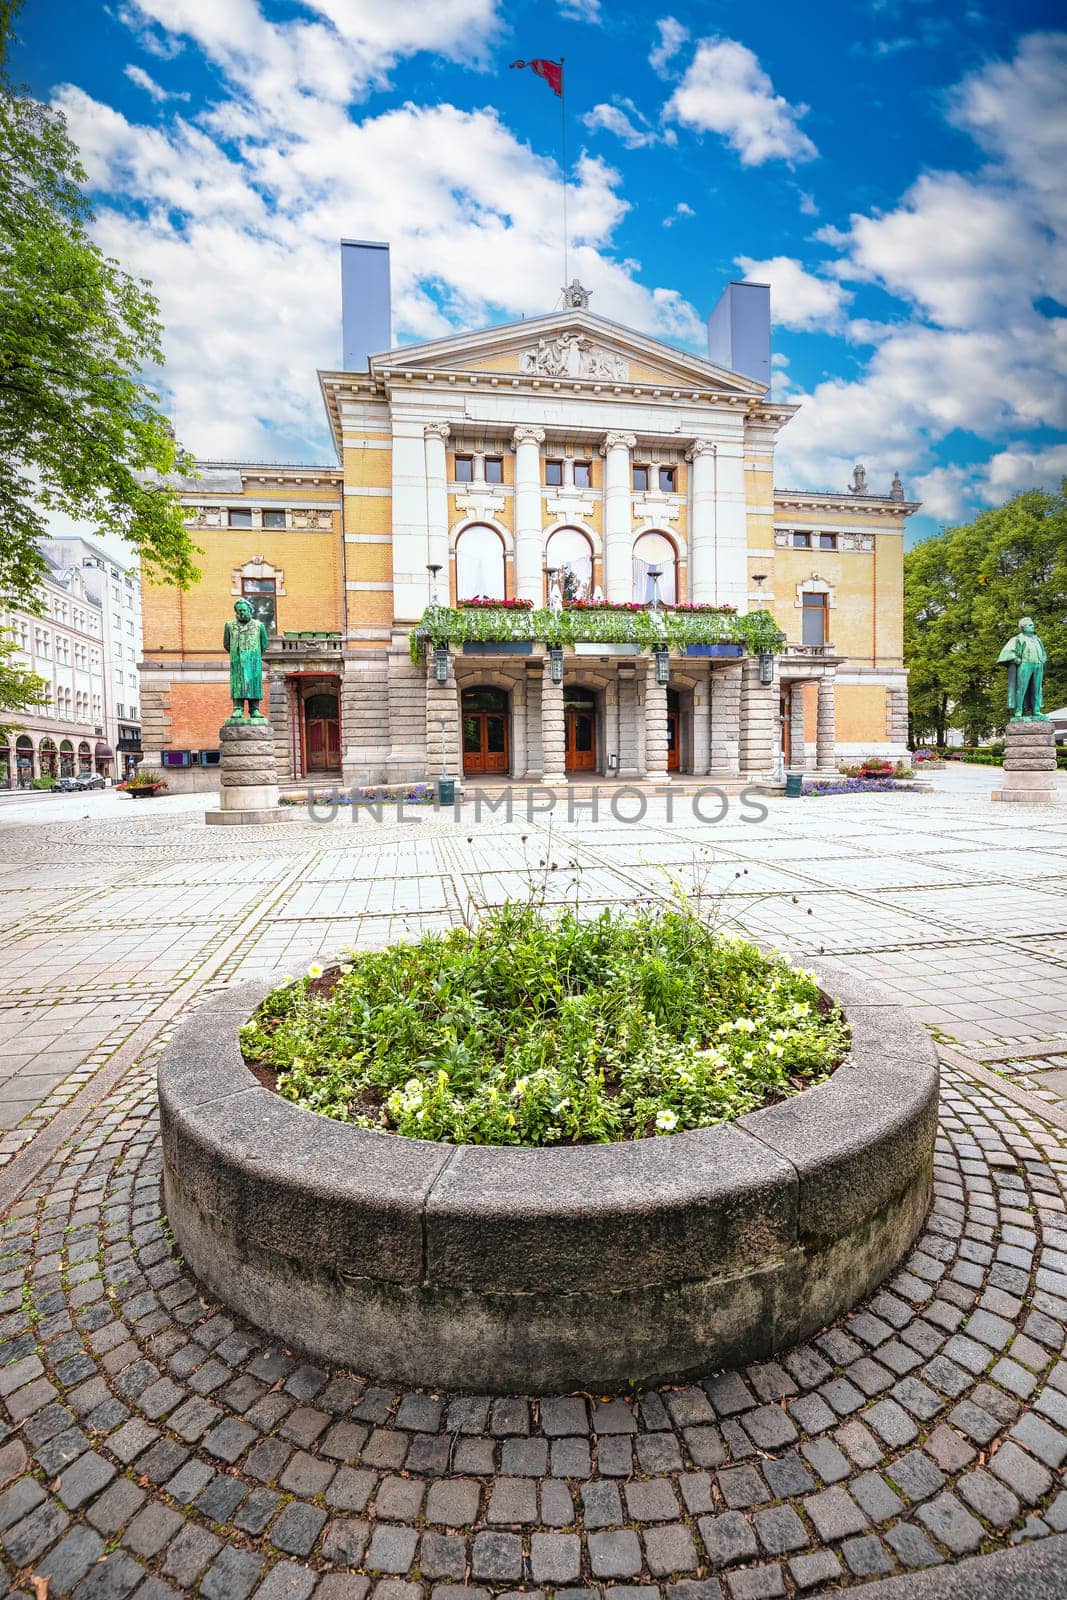 Oslo national theater front facade cobbled square view by xbrchx